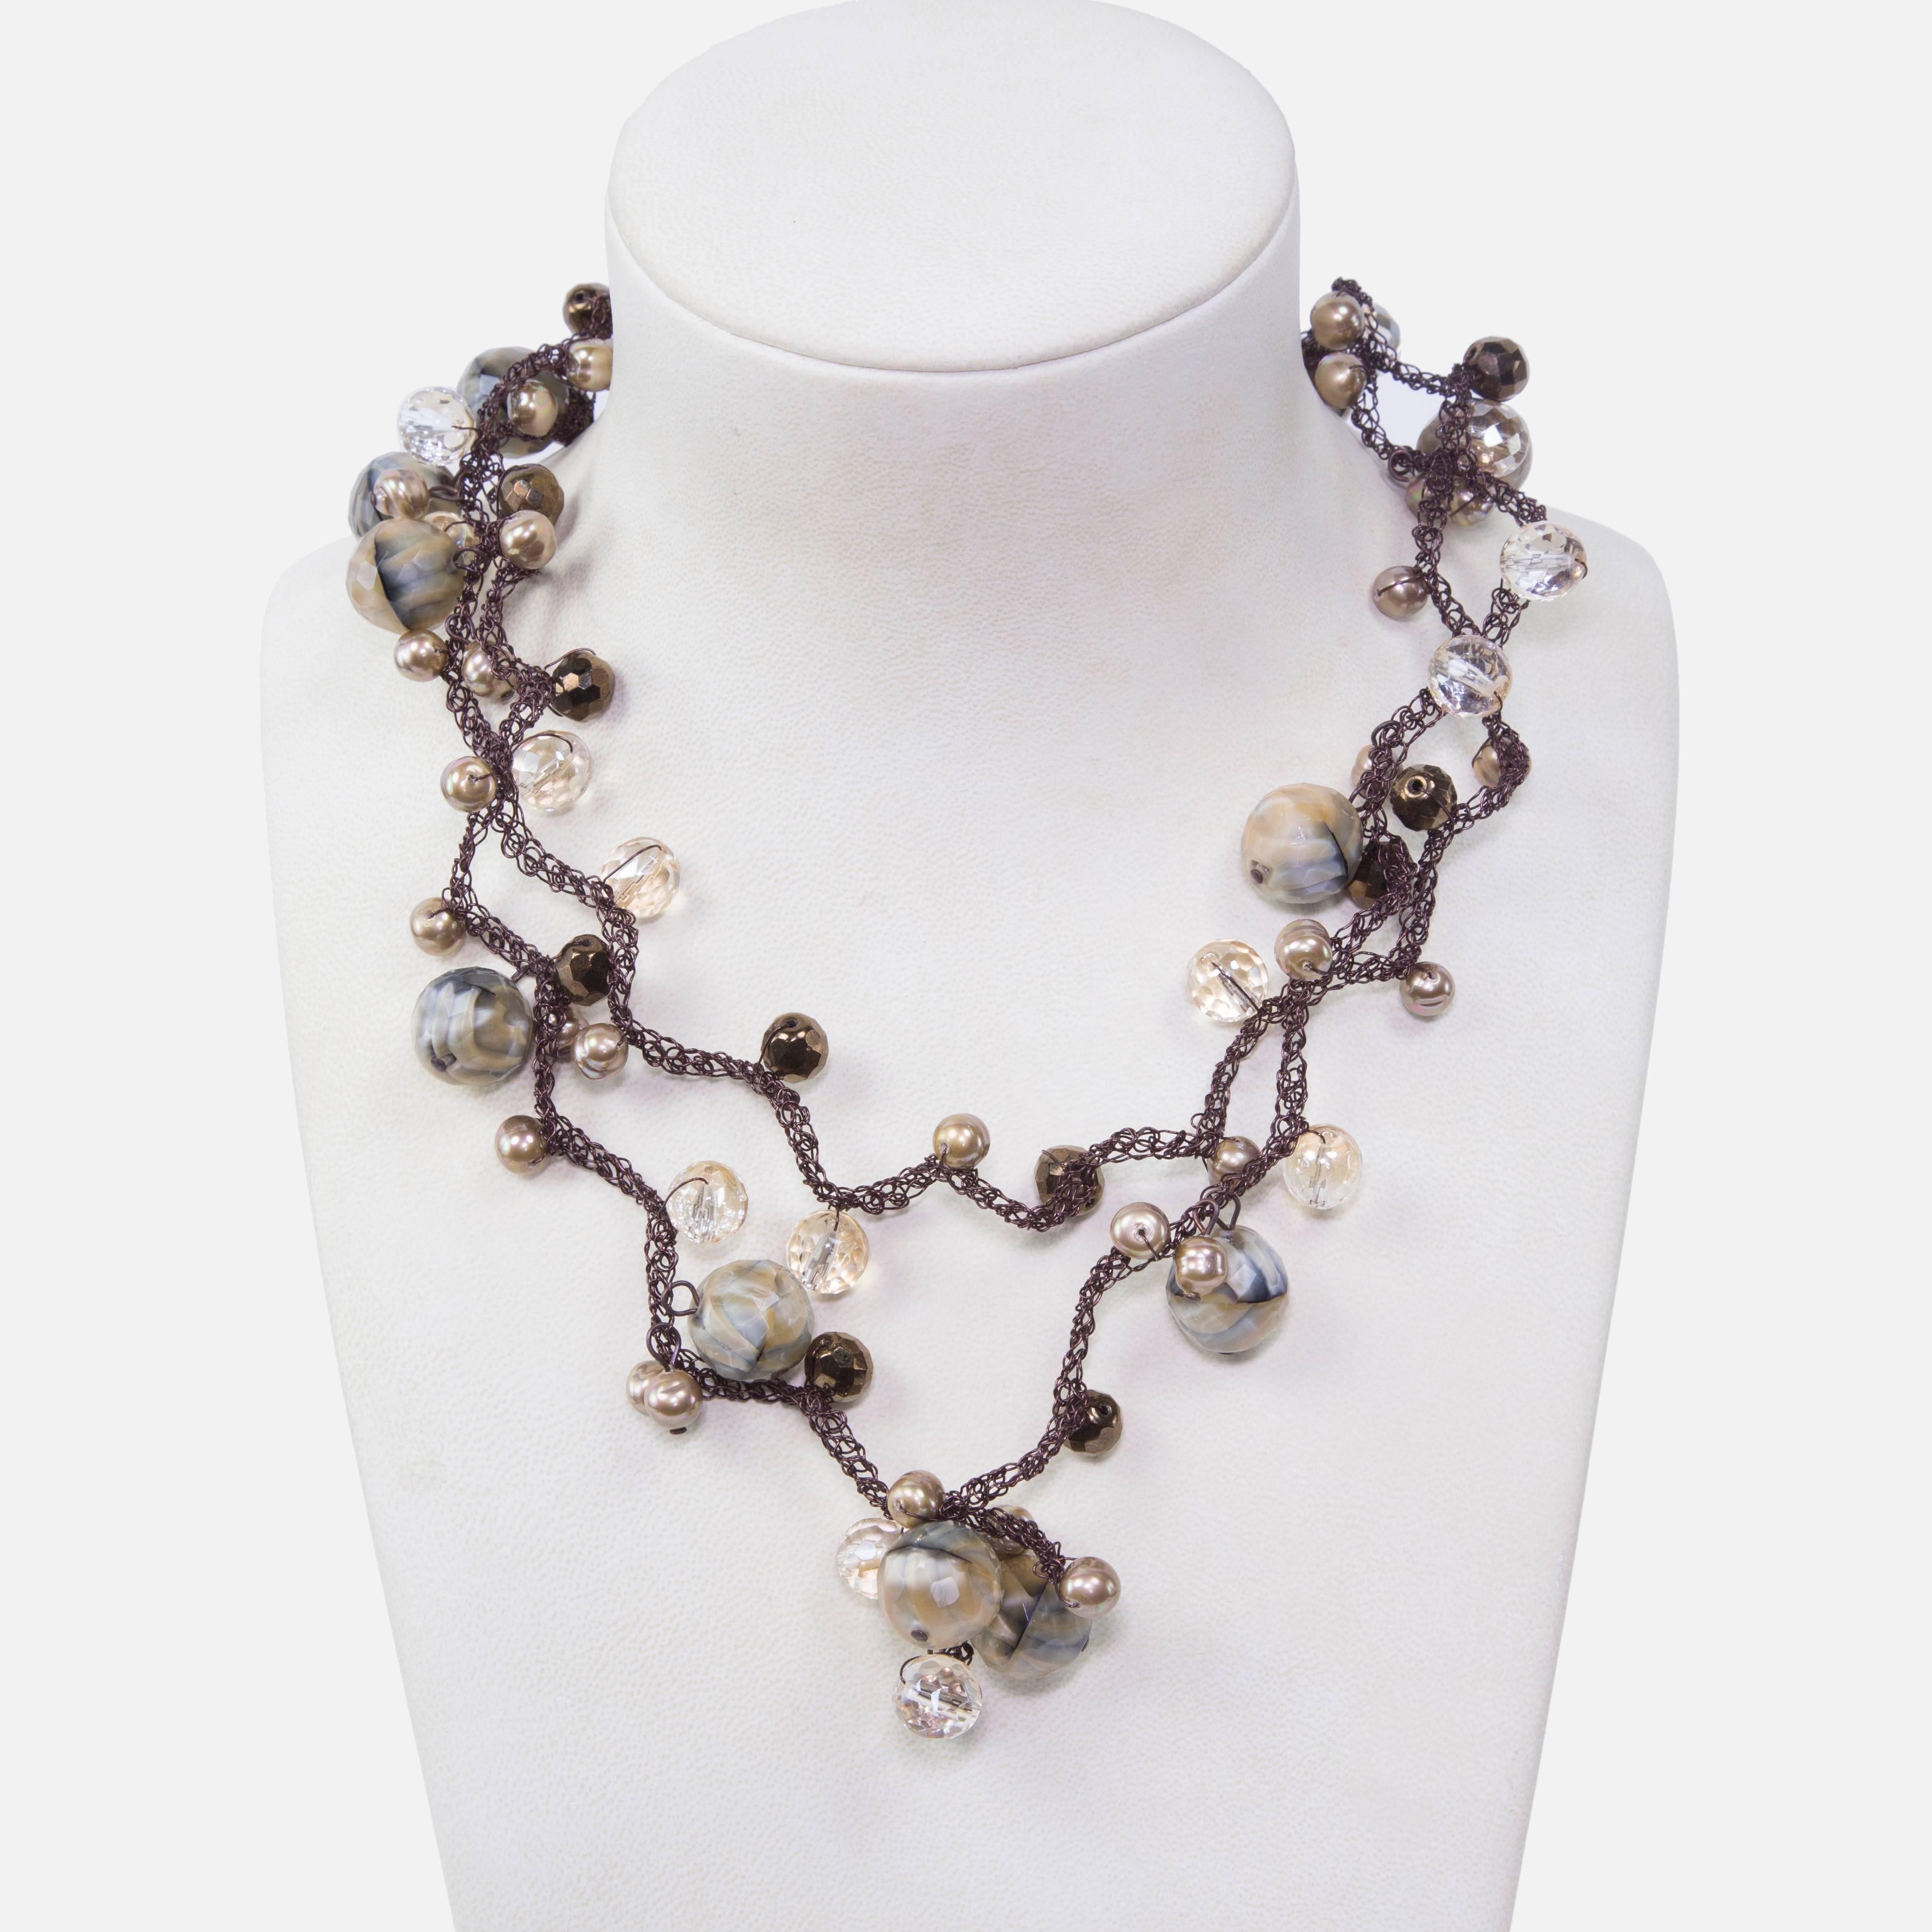 Long, elegant & stylish vintage Necklace made of large round Brown Marbled Faux Agate beads, inter-spaced with Faux Pearls and Crystals on braided stainless steel wire chain; approx. sizes: agate: 17mm; crystals: 11.5mm and pearls: 8.5mm each;